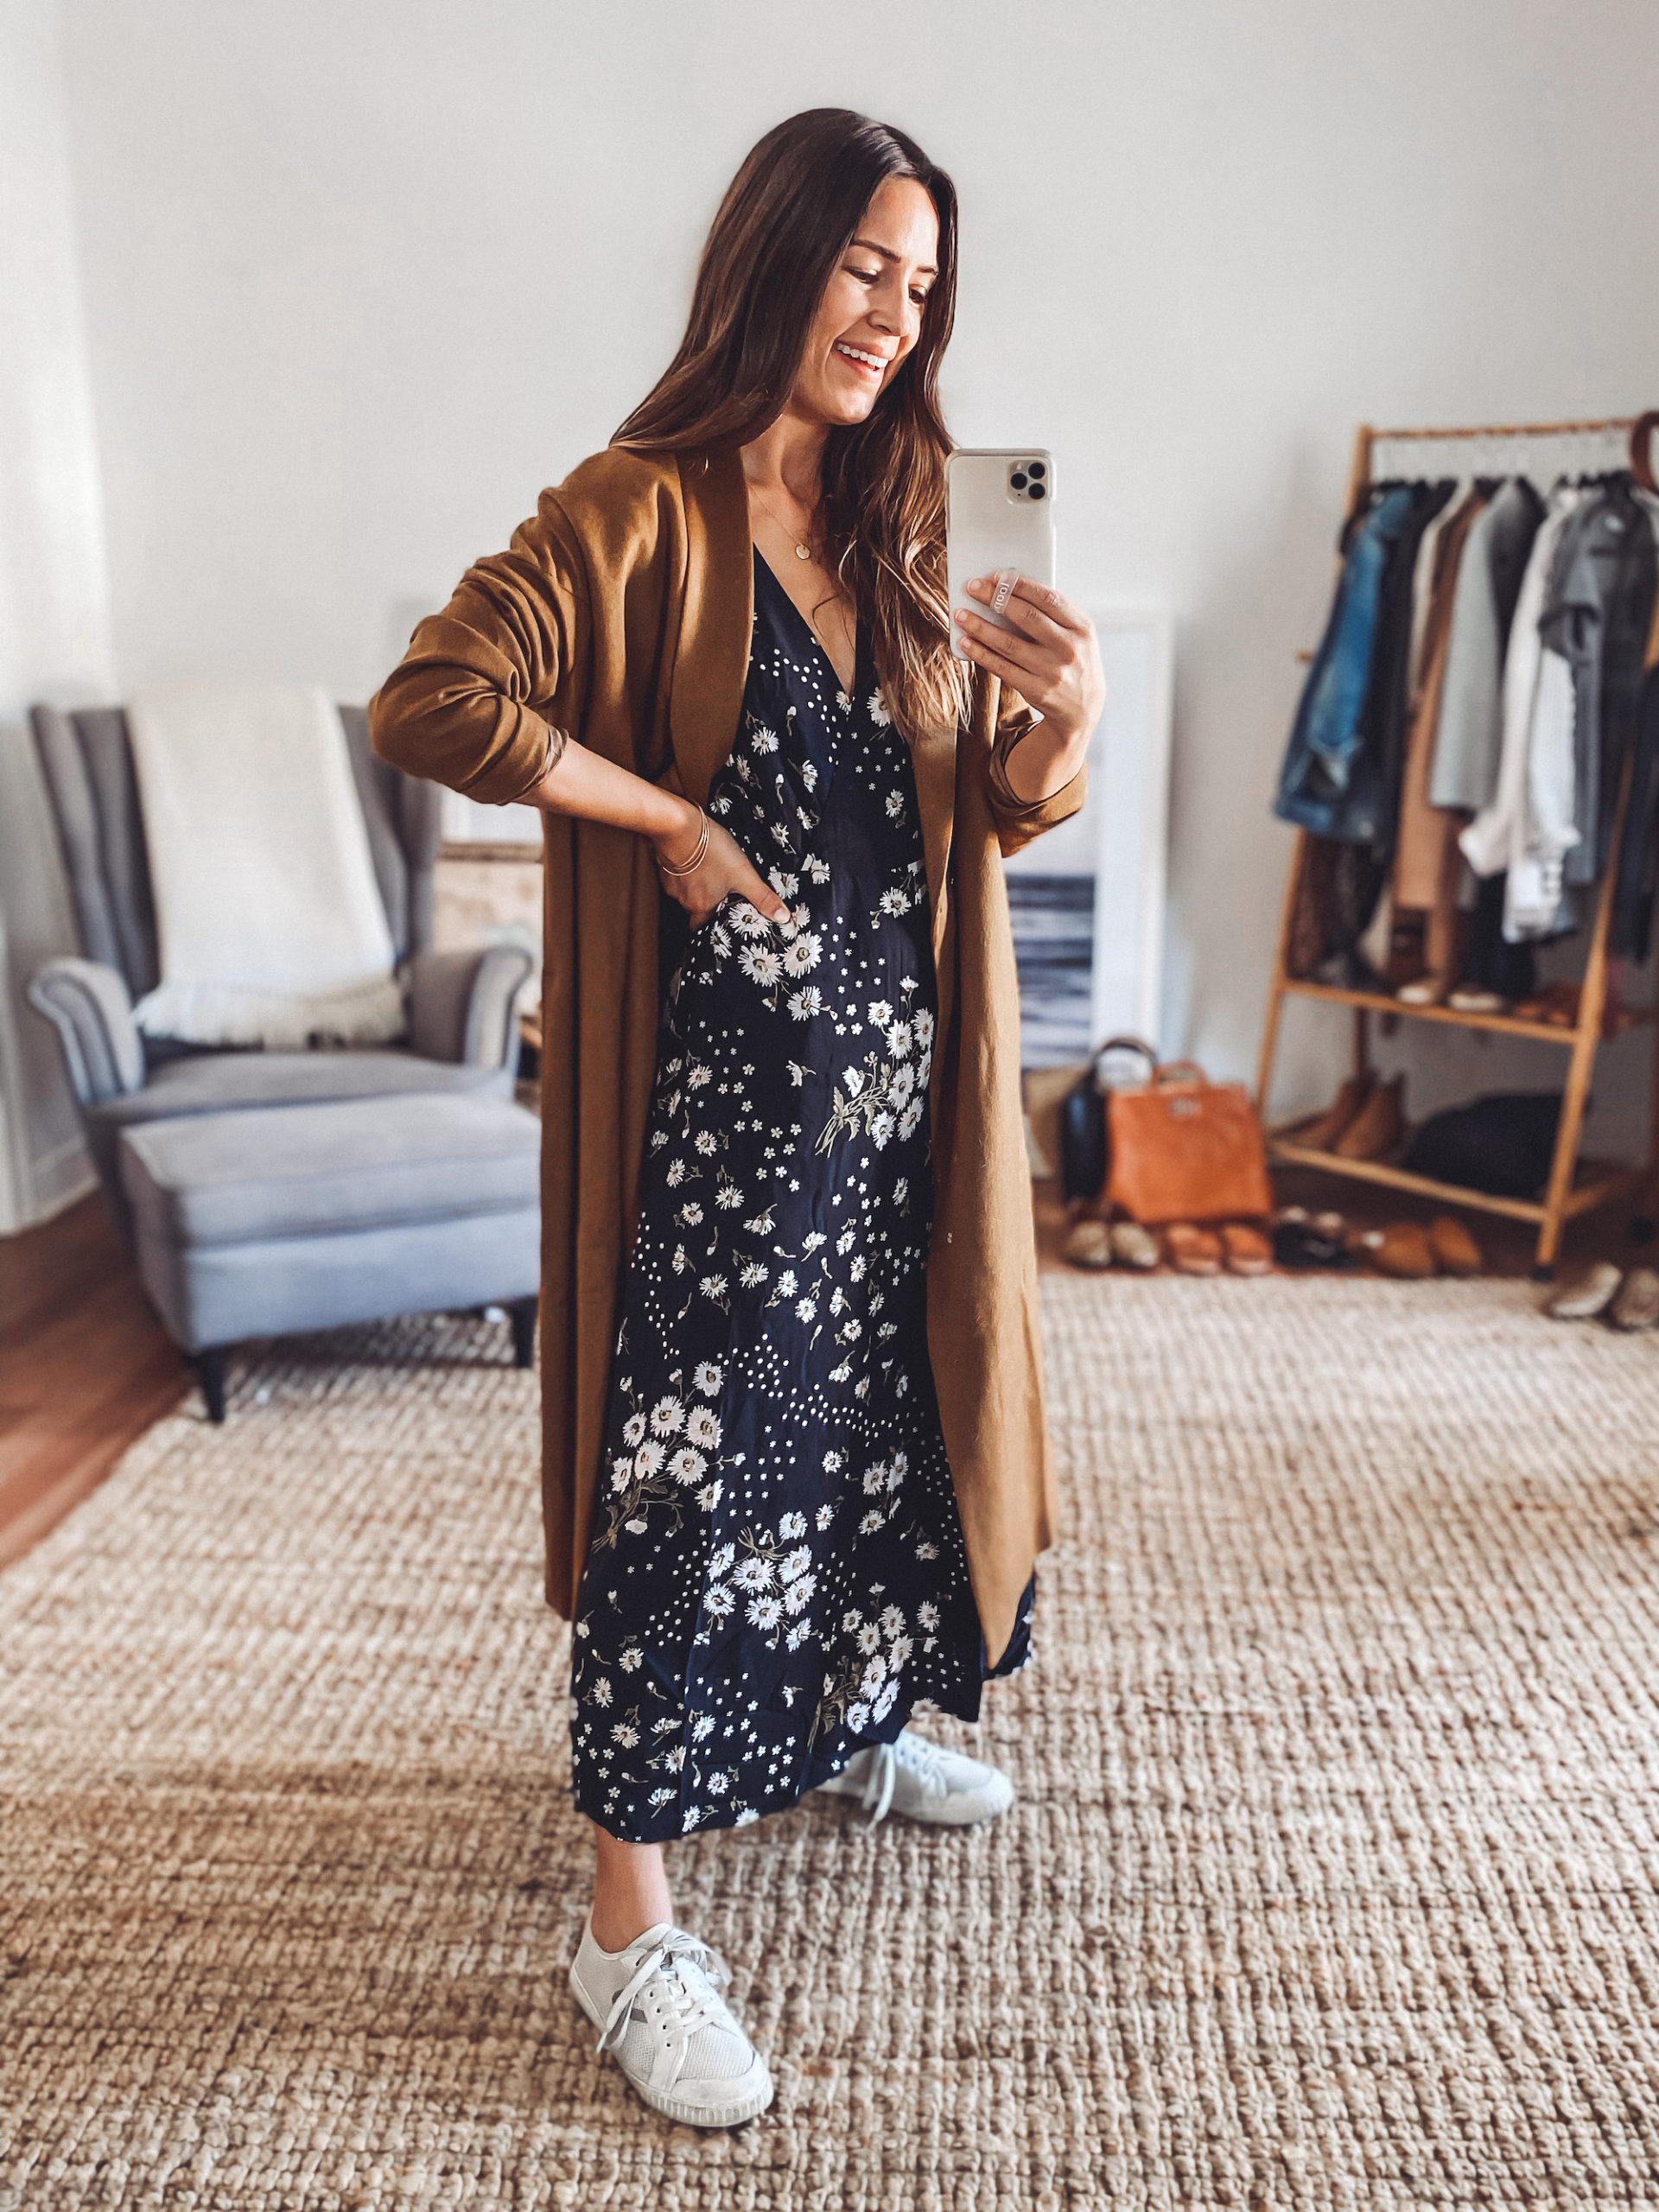 How to Accessorize a Floral Maxi Dress Like a Pro